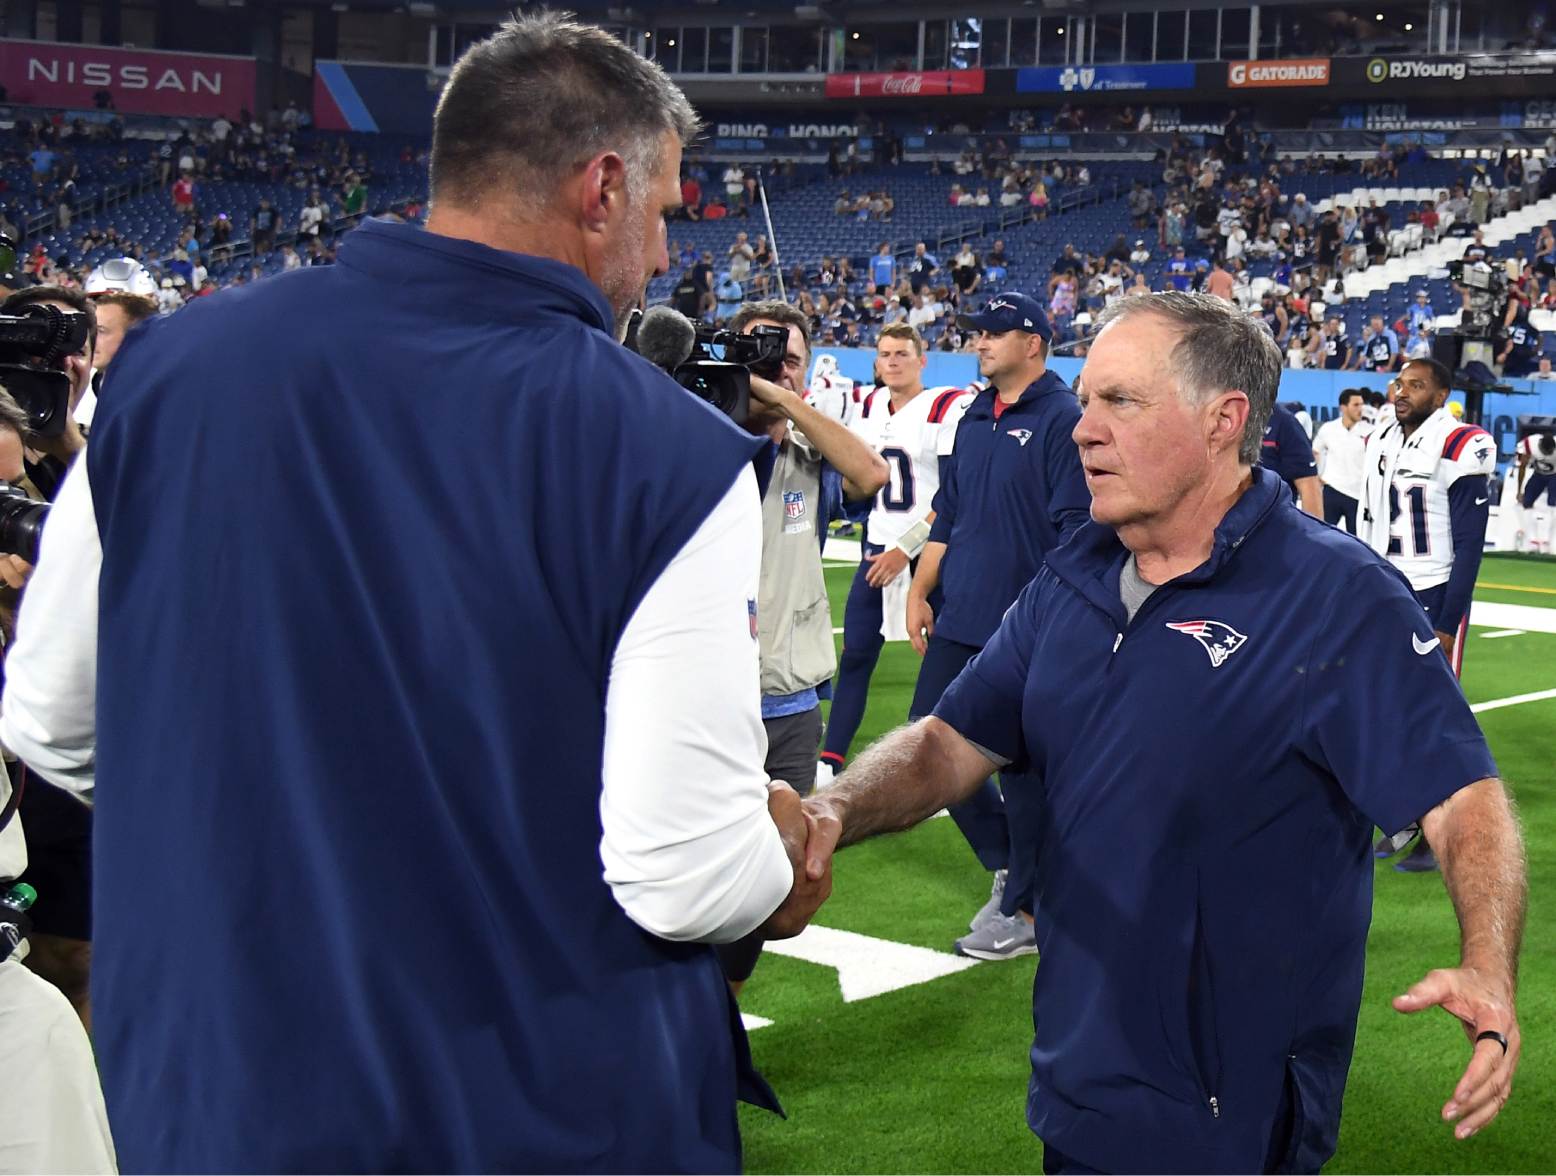 Aug 25, 2023; Nashville, Tennessee, USA; Tennessee Titans head coach Mike Vrabel shakes hands with New England Patriots head coach Bill Belichick after the game at Nissan Stadium. Credit: Christopher Hanewinckel-USA TODAY Sports